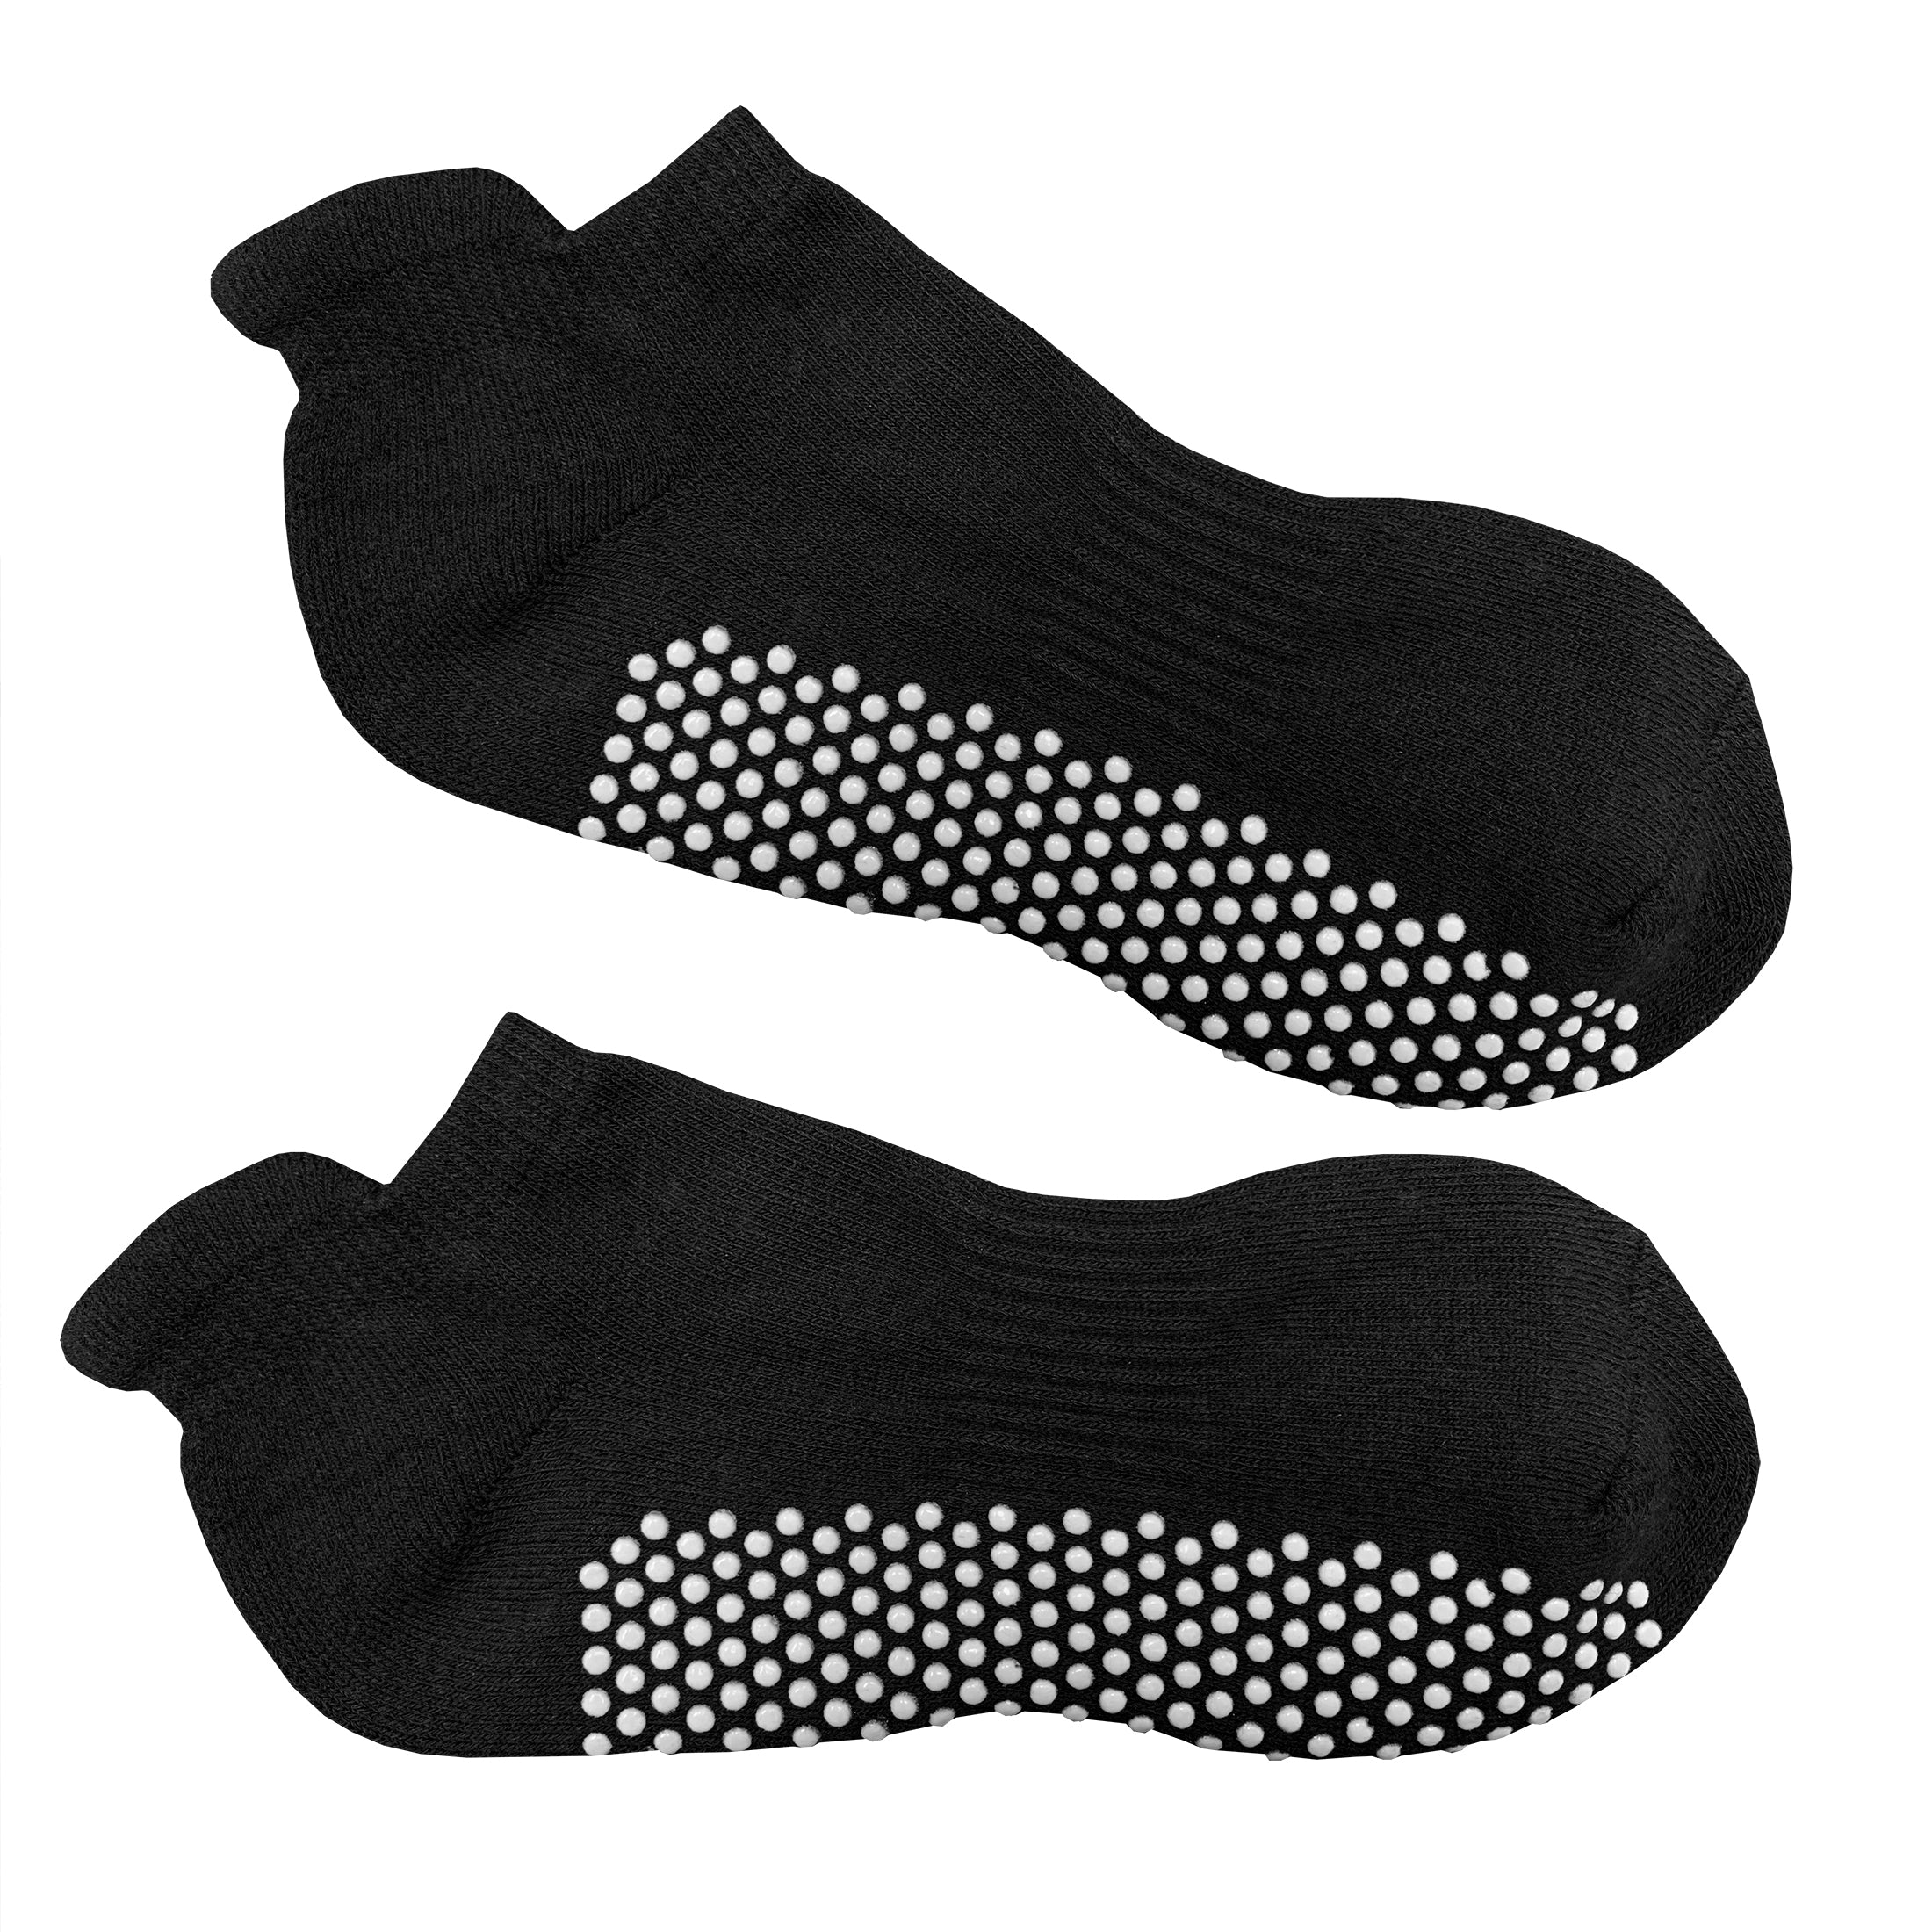 Aofa 1 Pair Socks with Grippers for Women - Hospital Socks - Non